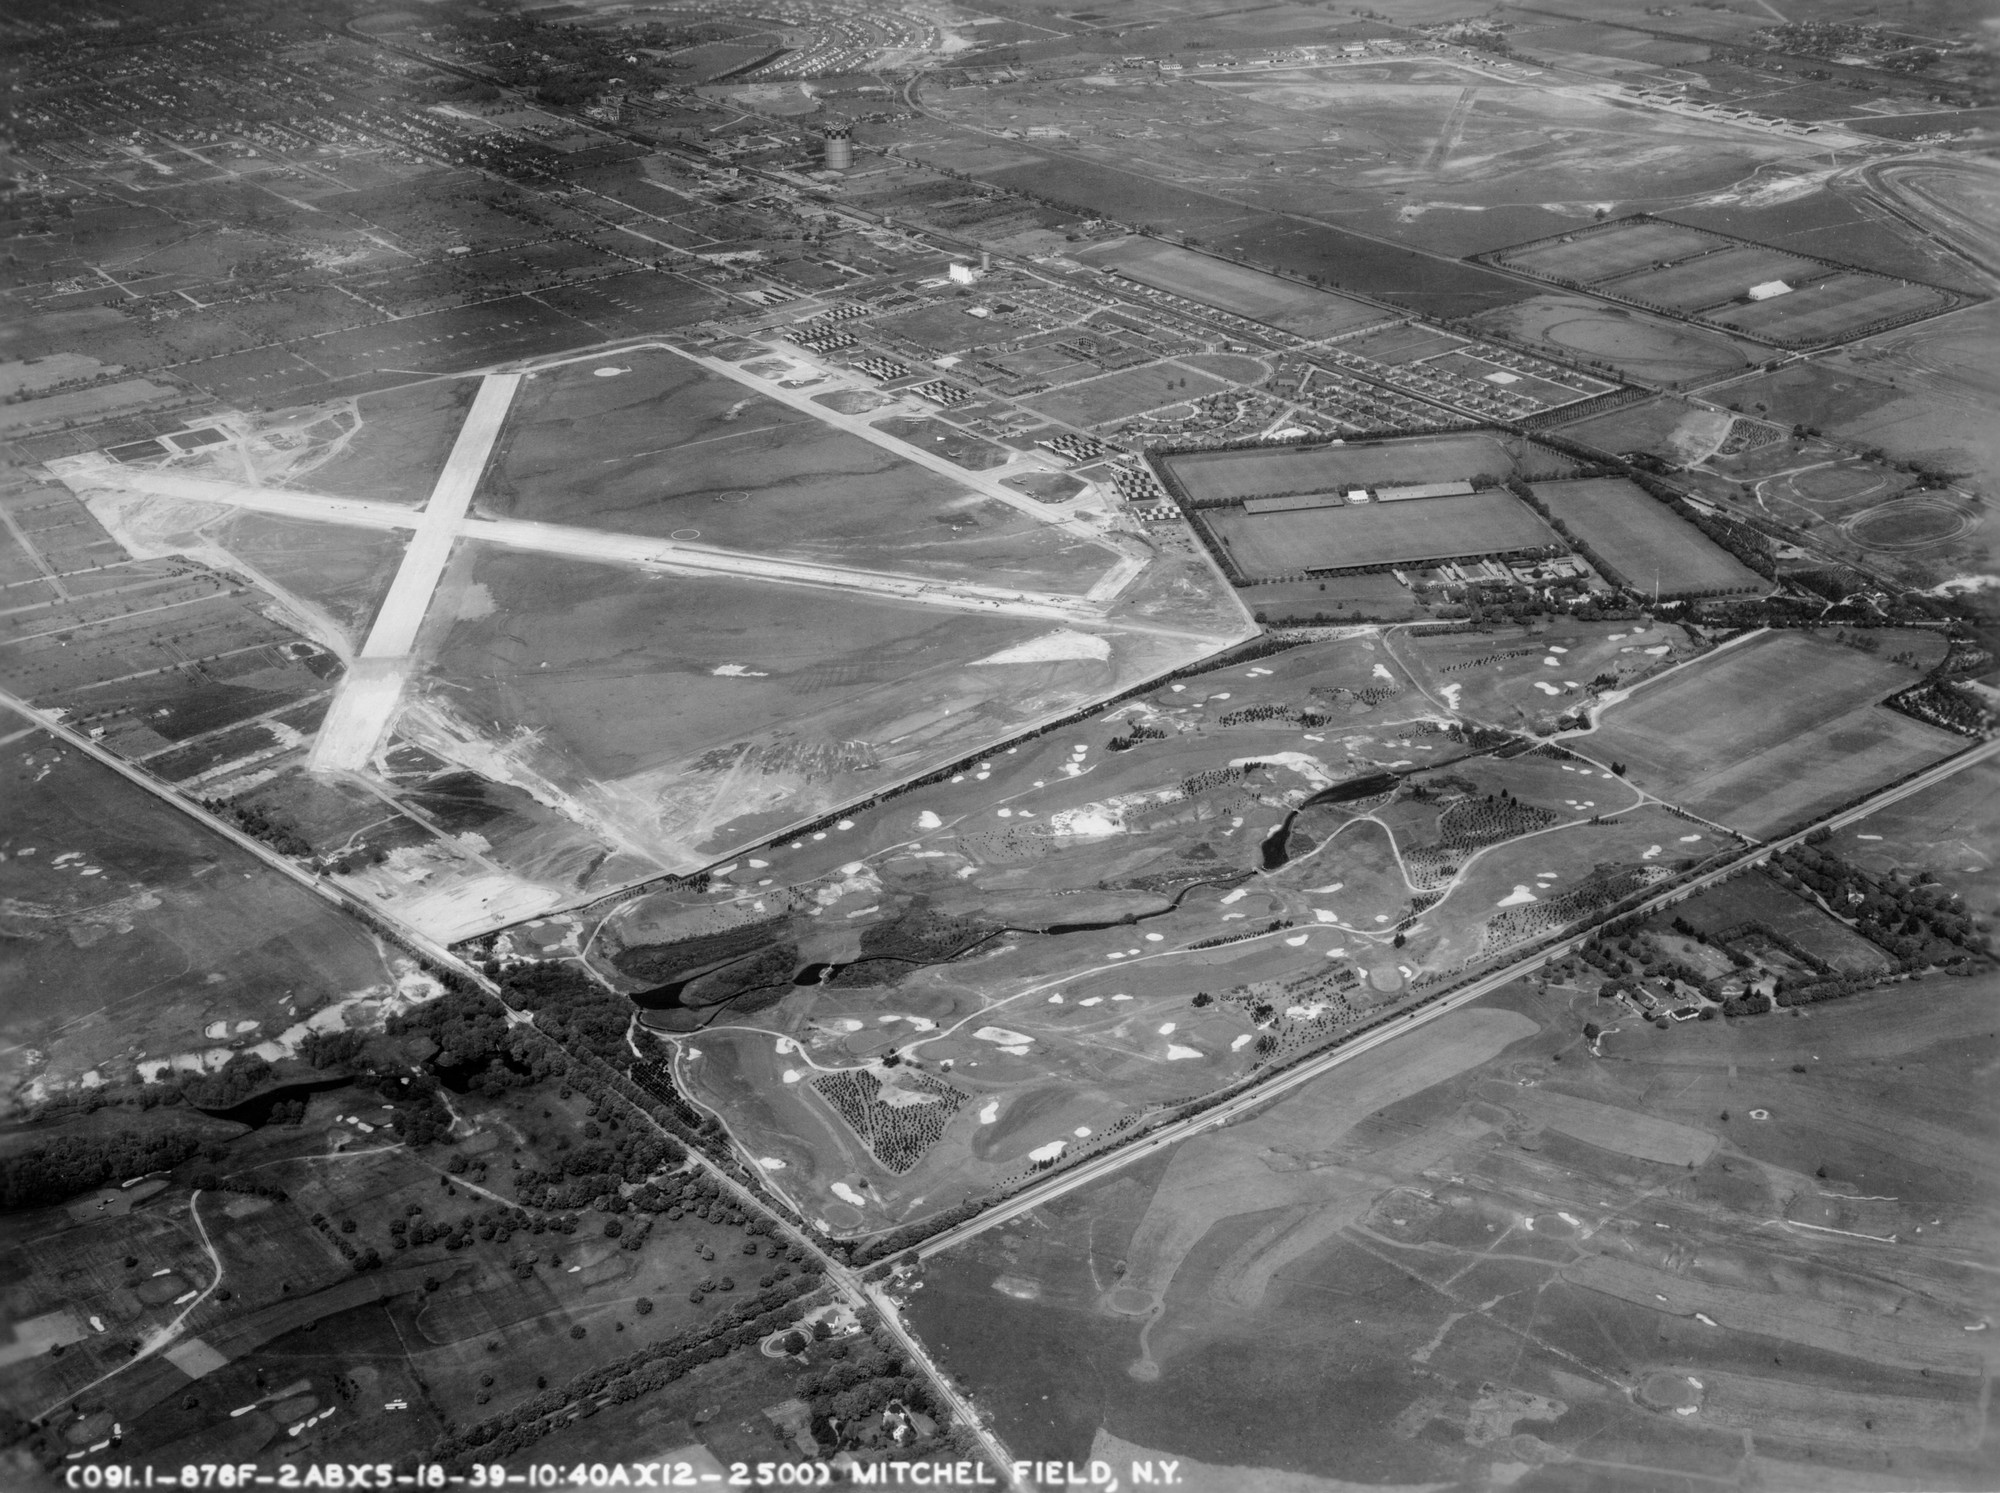 KroPlick said this aerial shot of the region, taken in 1938, shows Salisbury Links, and the proximity of East Meadow to the Coldstream Golf Club, the Meadow Brook Golf Club, the Meadow Brook Polo Field and Mitchel Field. Two years earlier, the races briefly returned to the area after the four-mile Roosevelt Raceway was constructed.